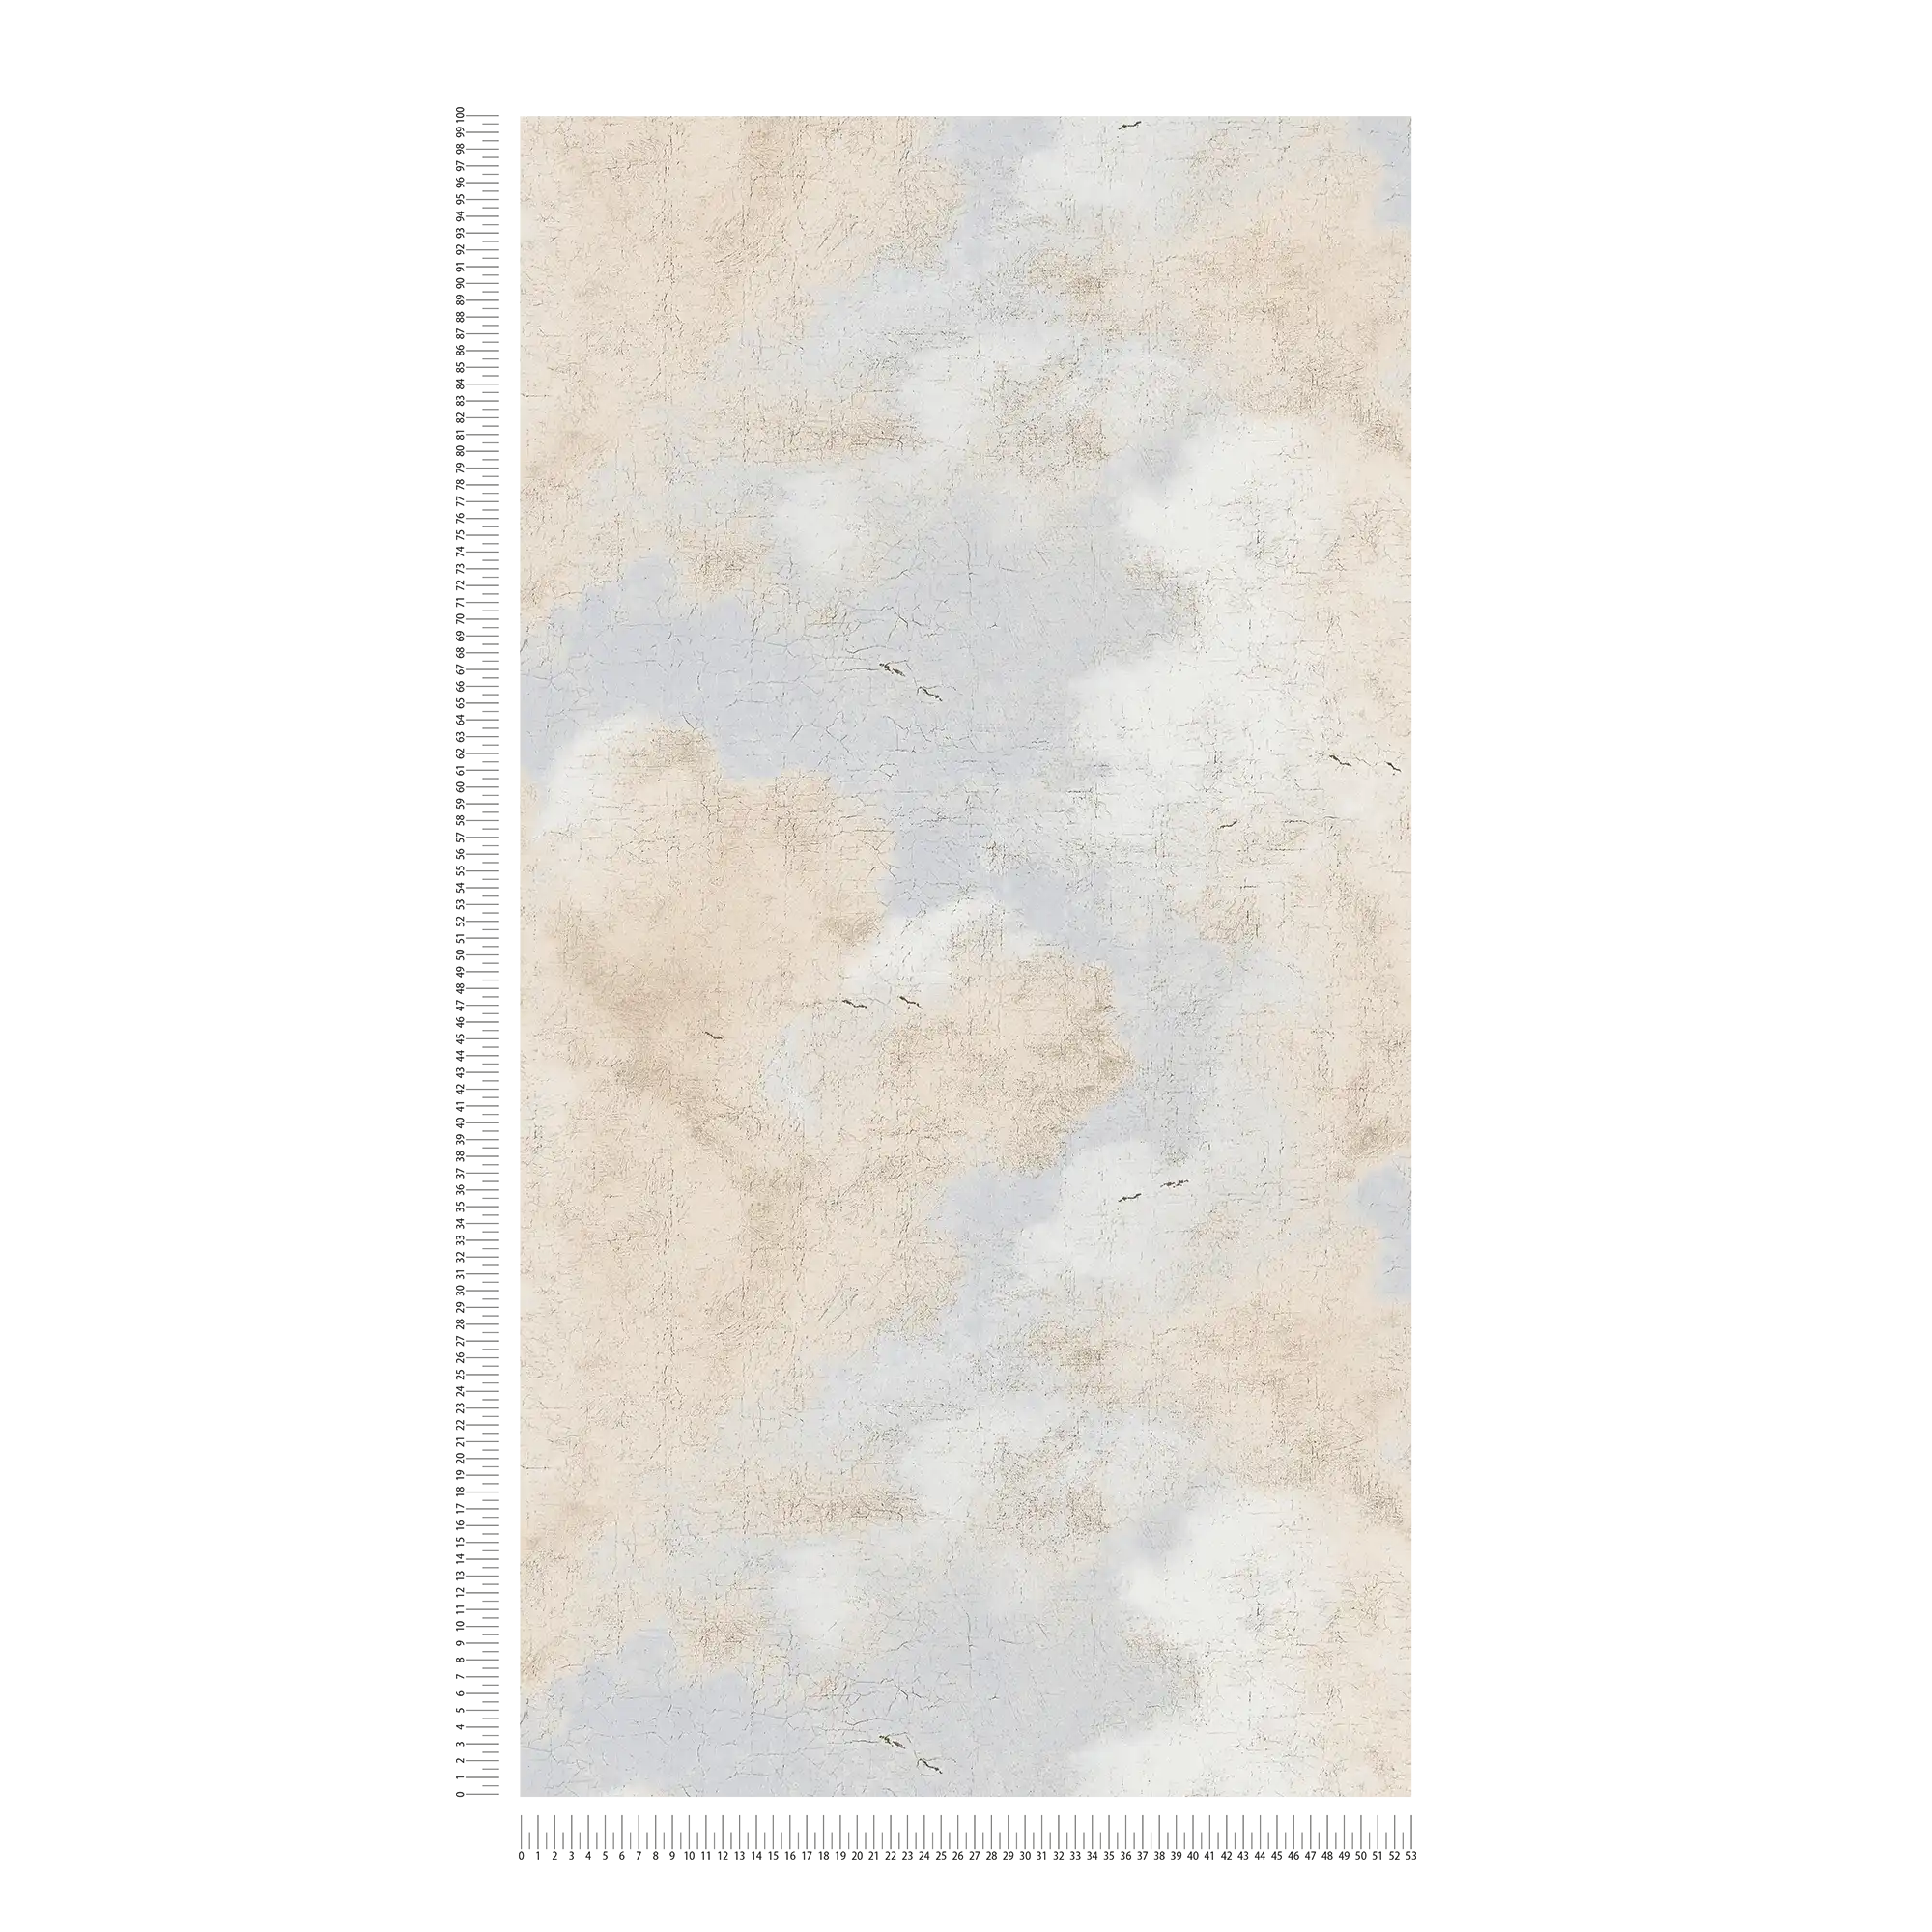             Clouds wallpaper with oil painting look - cream, white
        